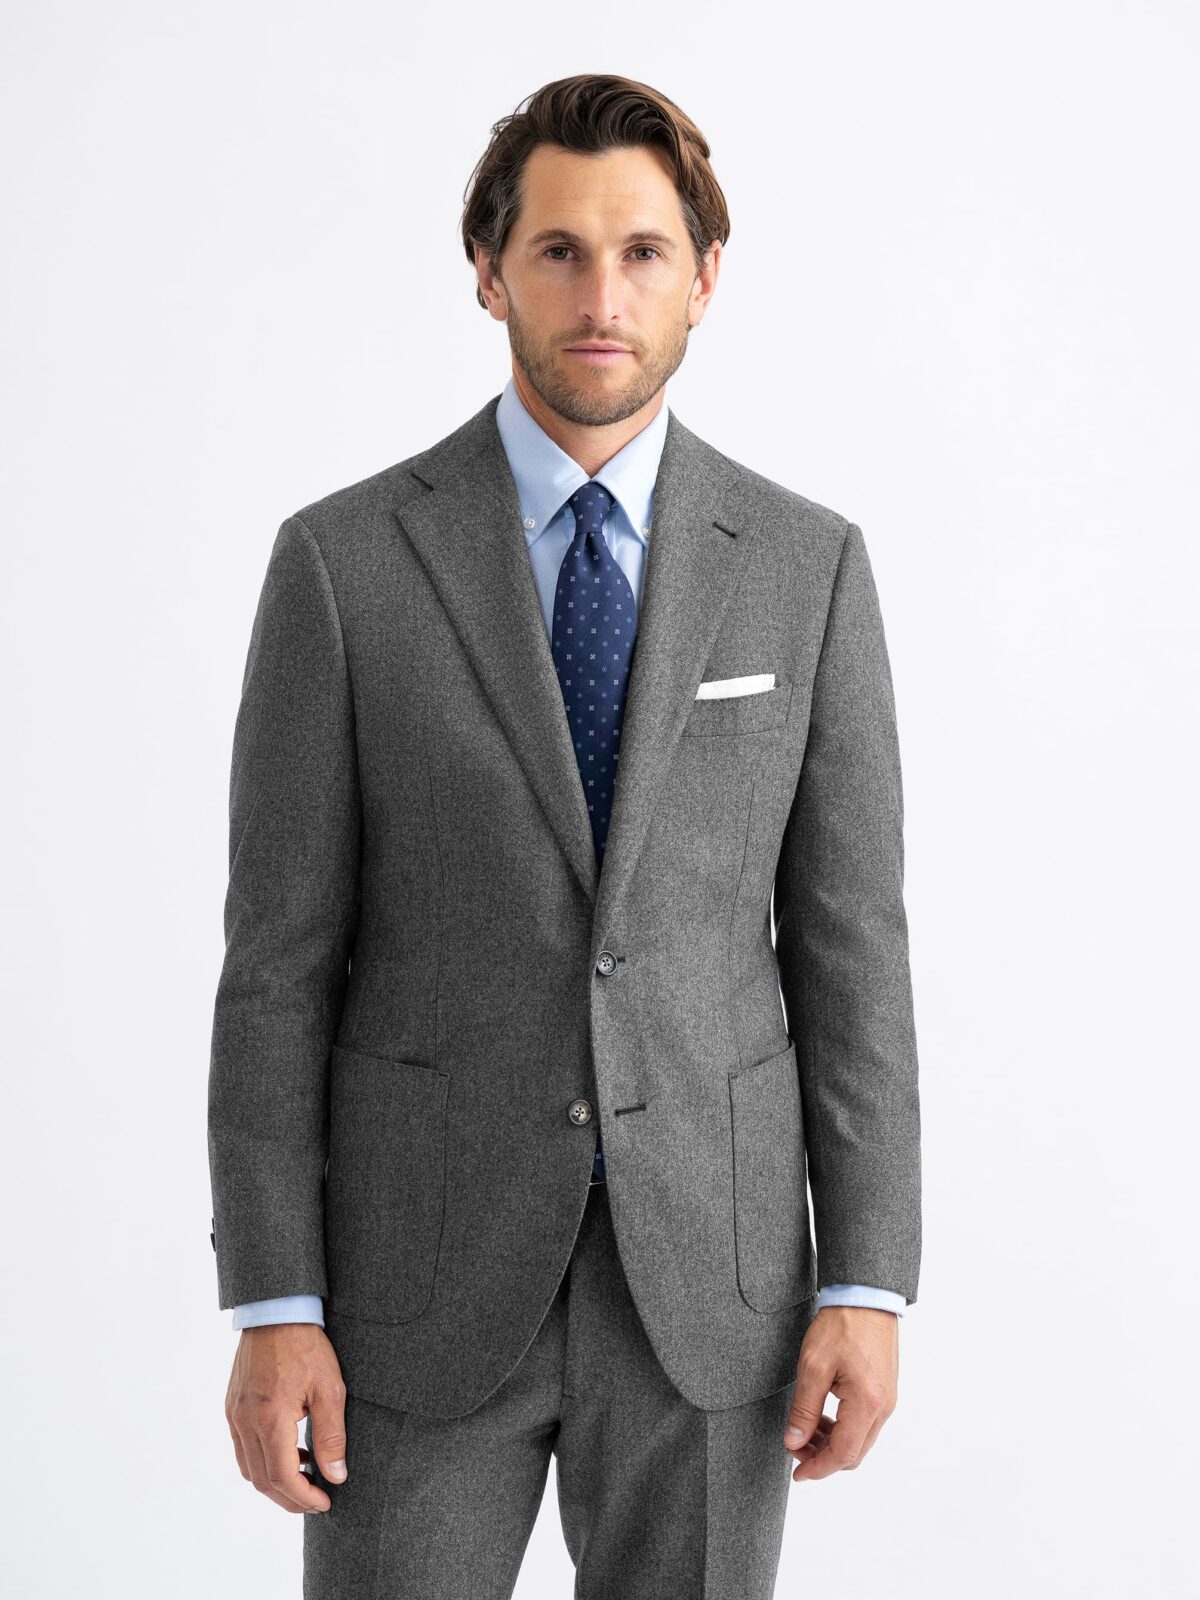 VBC Grey Wool Flannel Bedford Suit - Custom Fit Tailored Clothing